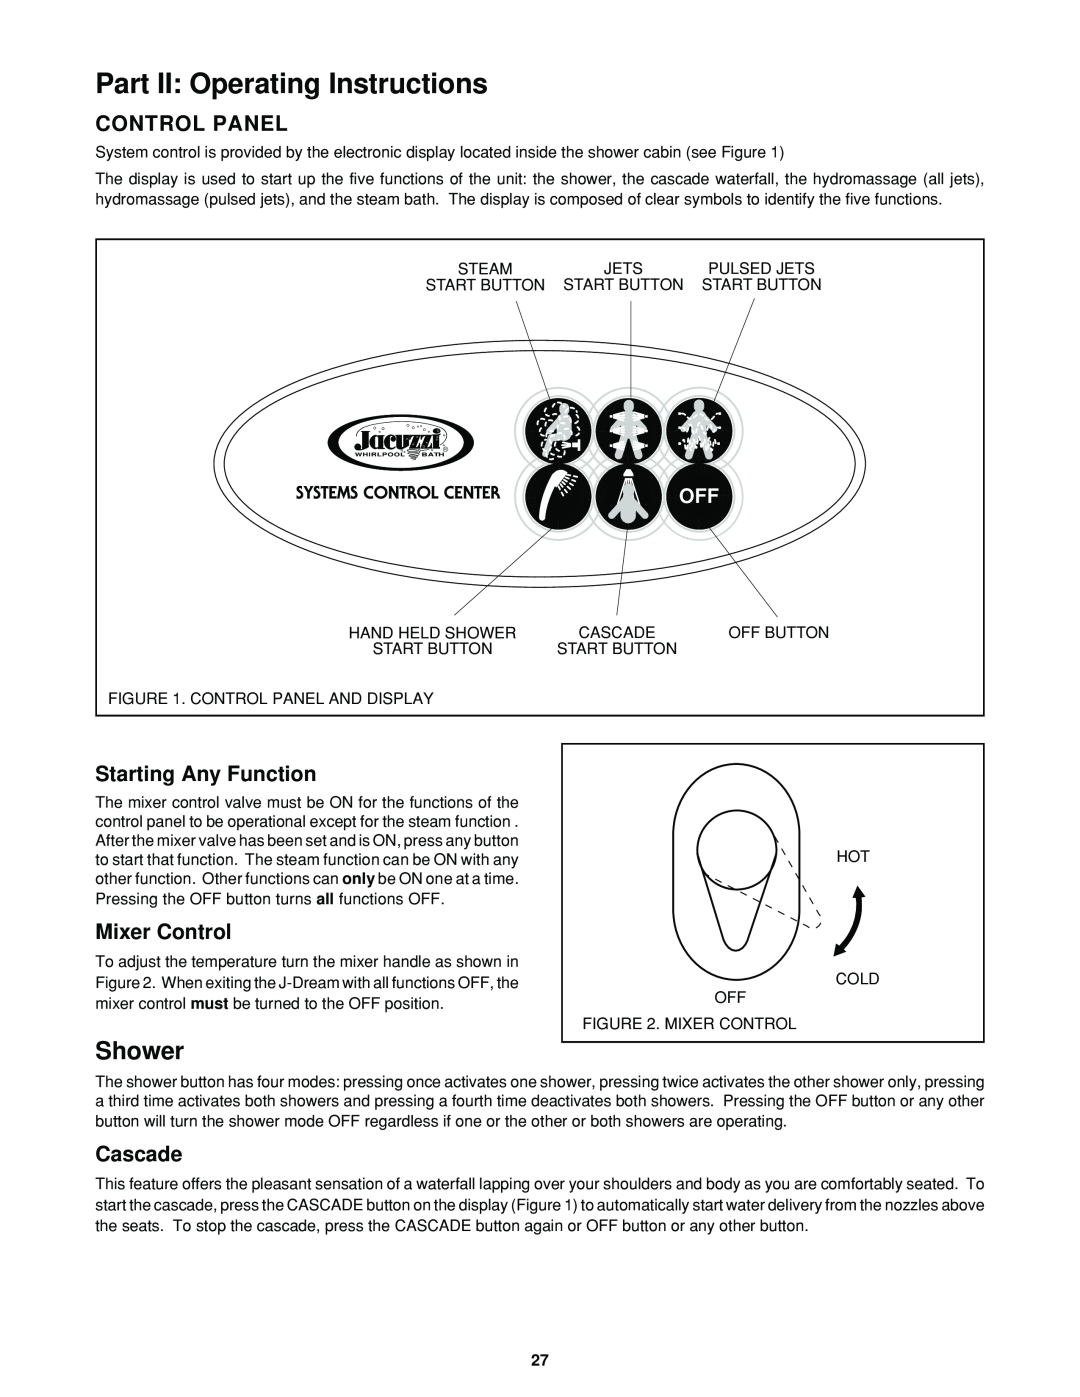 Jacuzzi J-DREAM II Part II Operating Instructions, Shower, Control Panel, Starting Any Function, Mixer Control, Cascade 